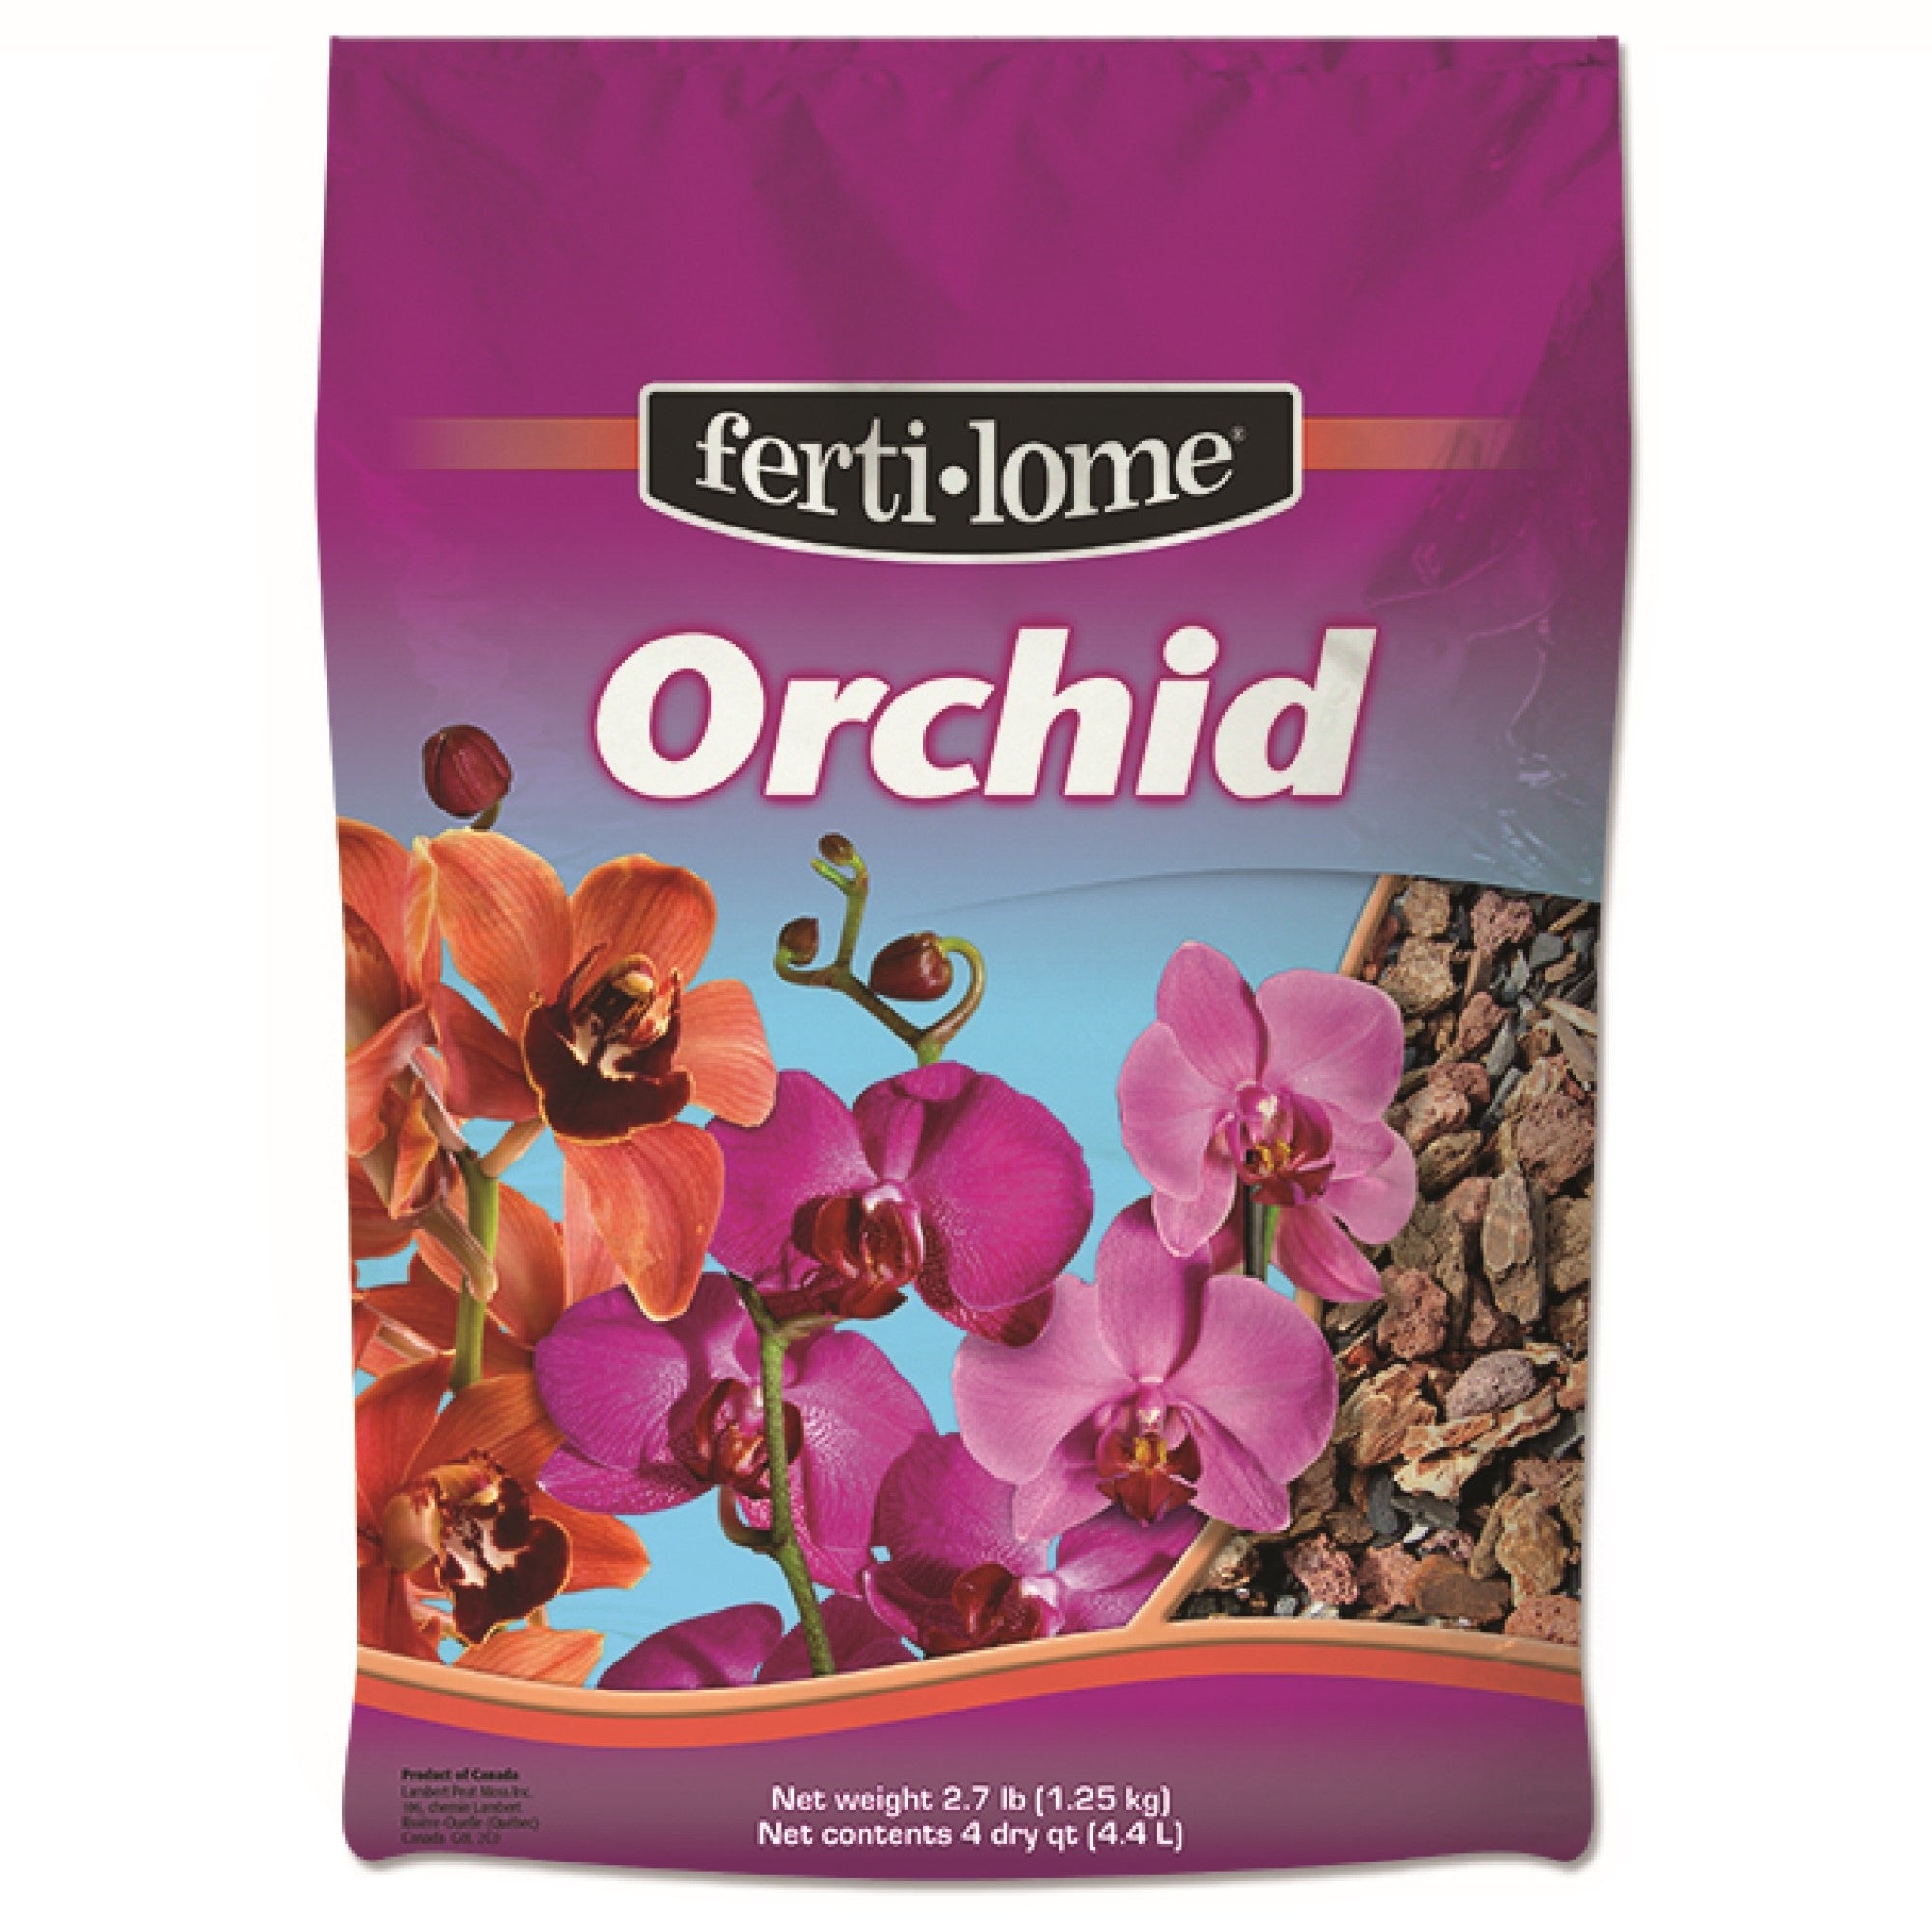 Fertilome Orchid Mix, for Drainage and Better Root Environment, 4qt